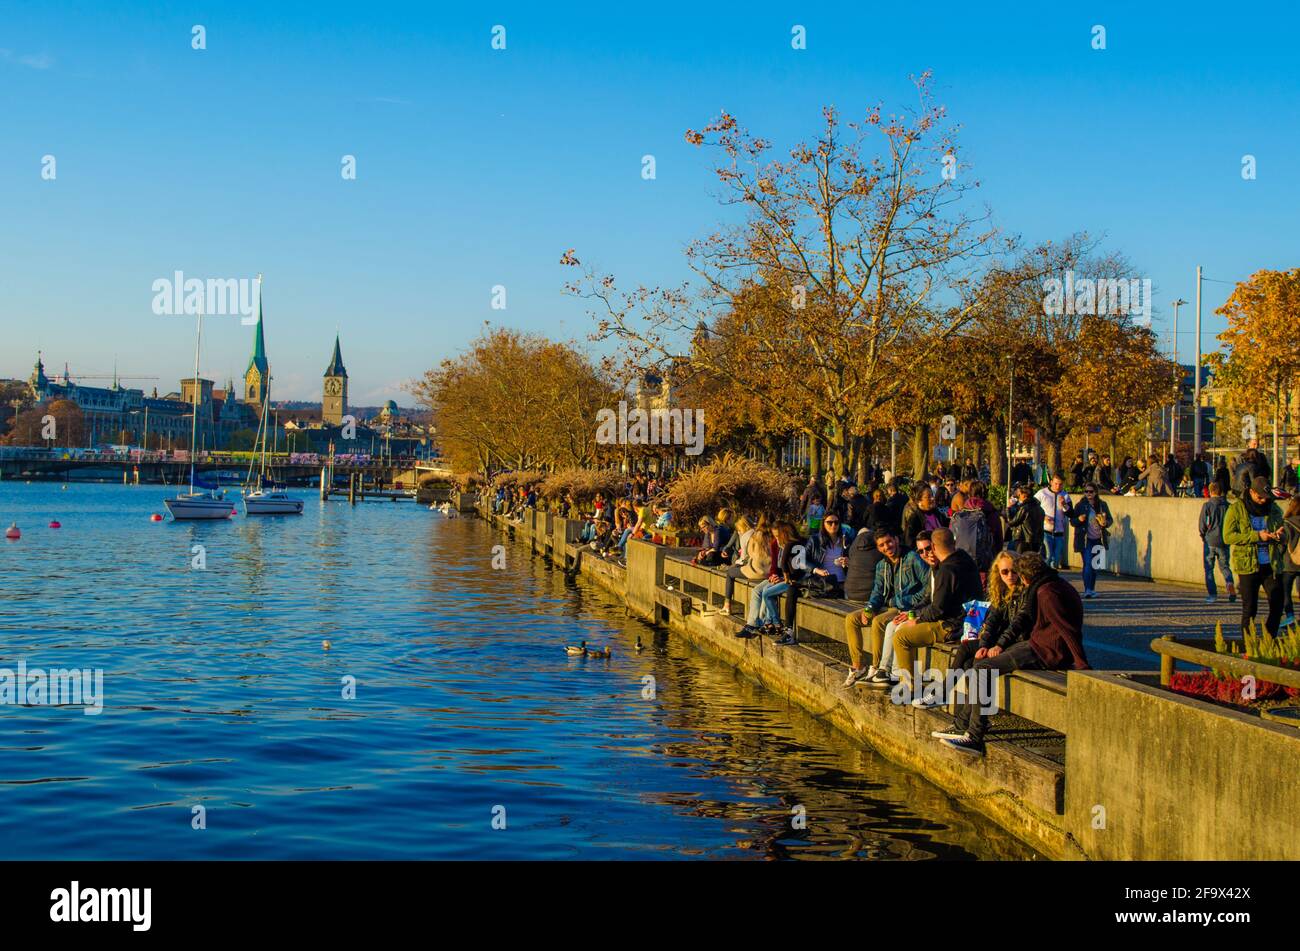 ZURICH, SWITZERLAND, OCTOBER 24, 2015: people are walking on a sunny promenade along the zurich lake in switzerland during late autumn afternoon Stock Photo